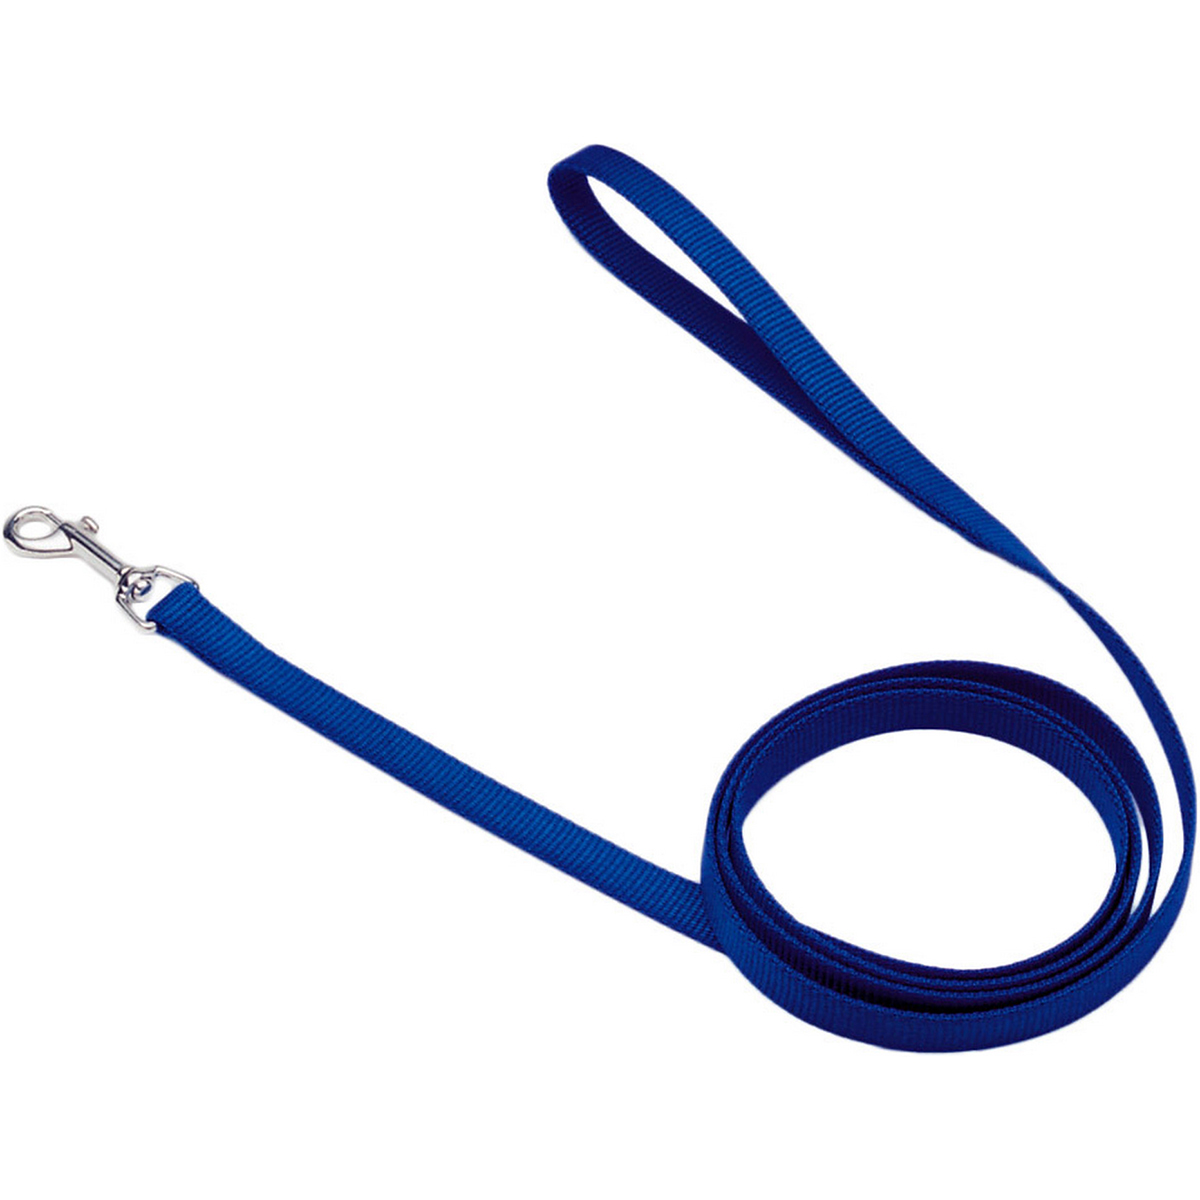 Picture of Coastal Pet Products 00404-BLU04 0.62 in. x 4 ft. Single-Ply Nylon Training Dog Leash, Blue